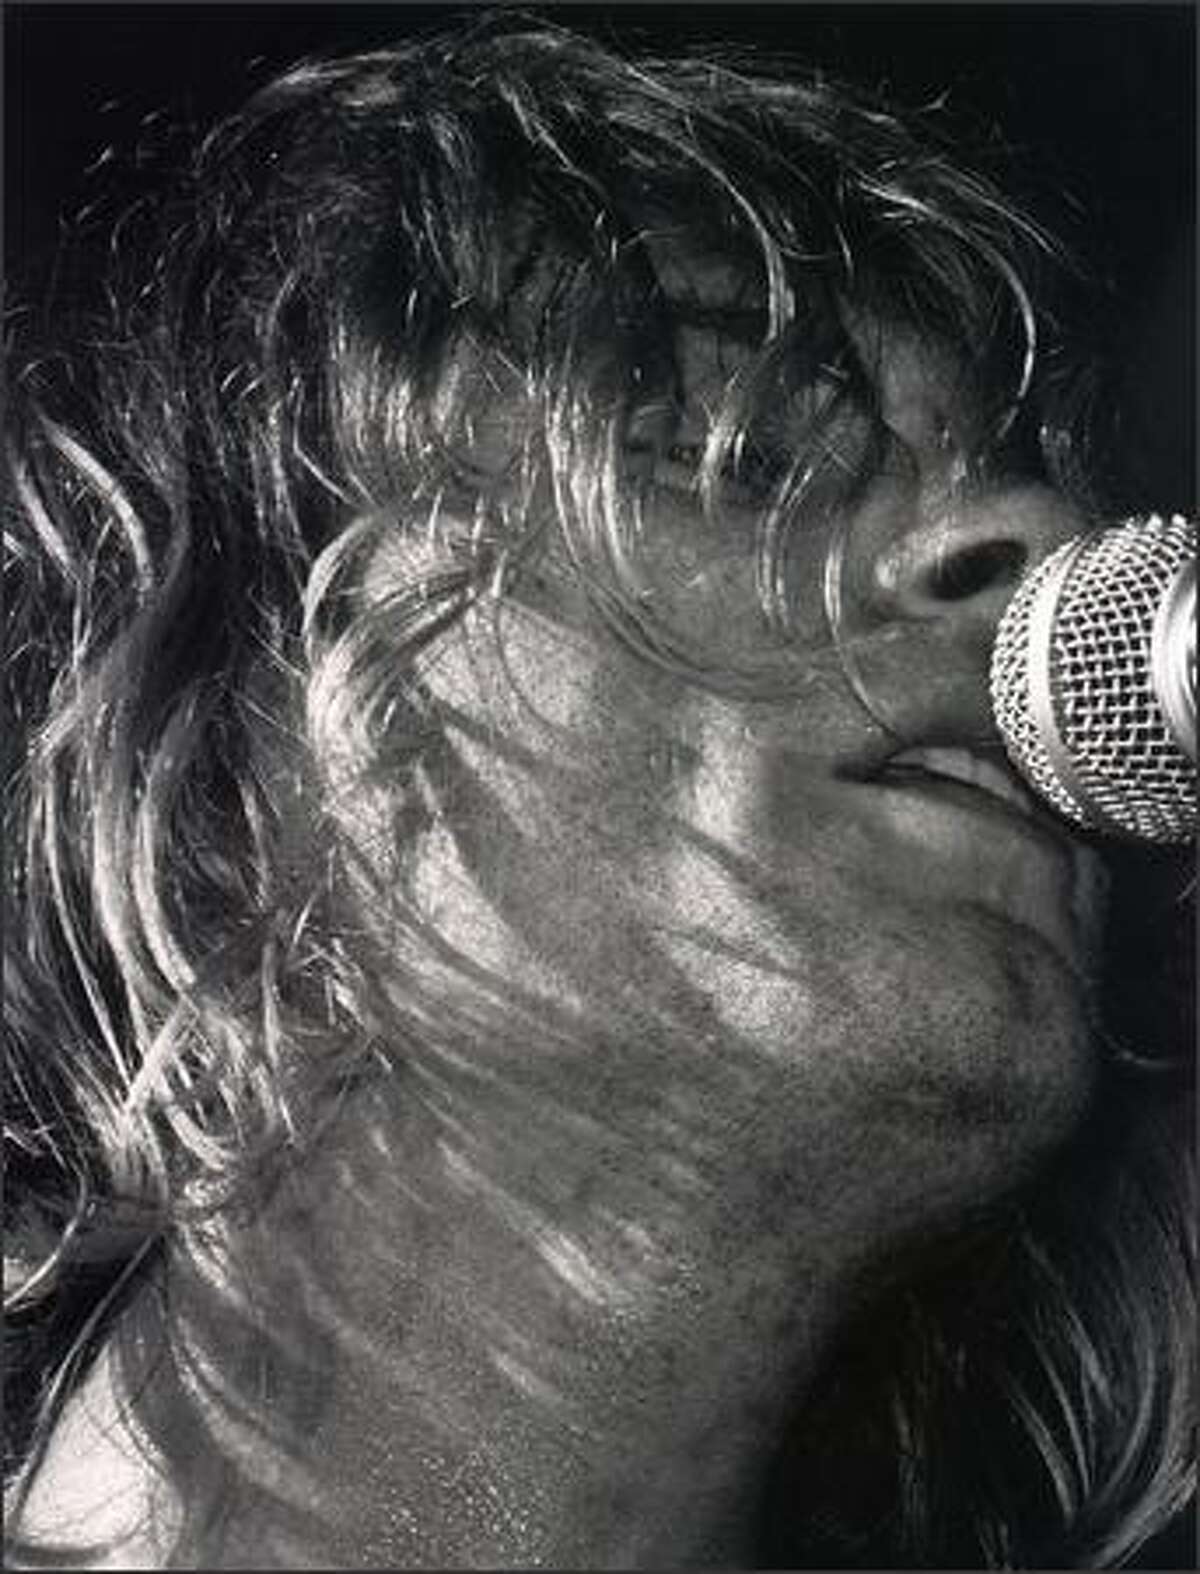 Kurt Cobain sings during Nirvana's concert at the Paramount in Seattle on Halloween 1991.